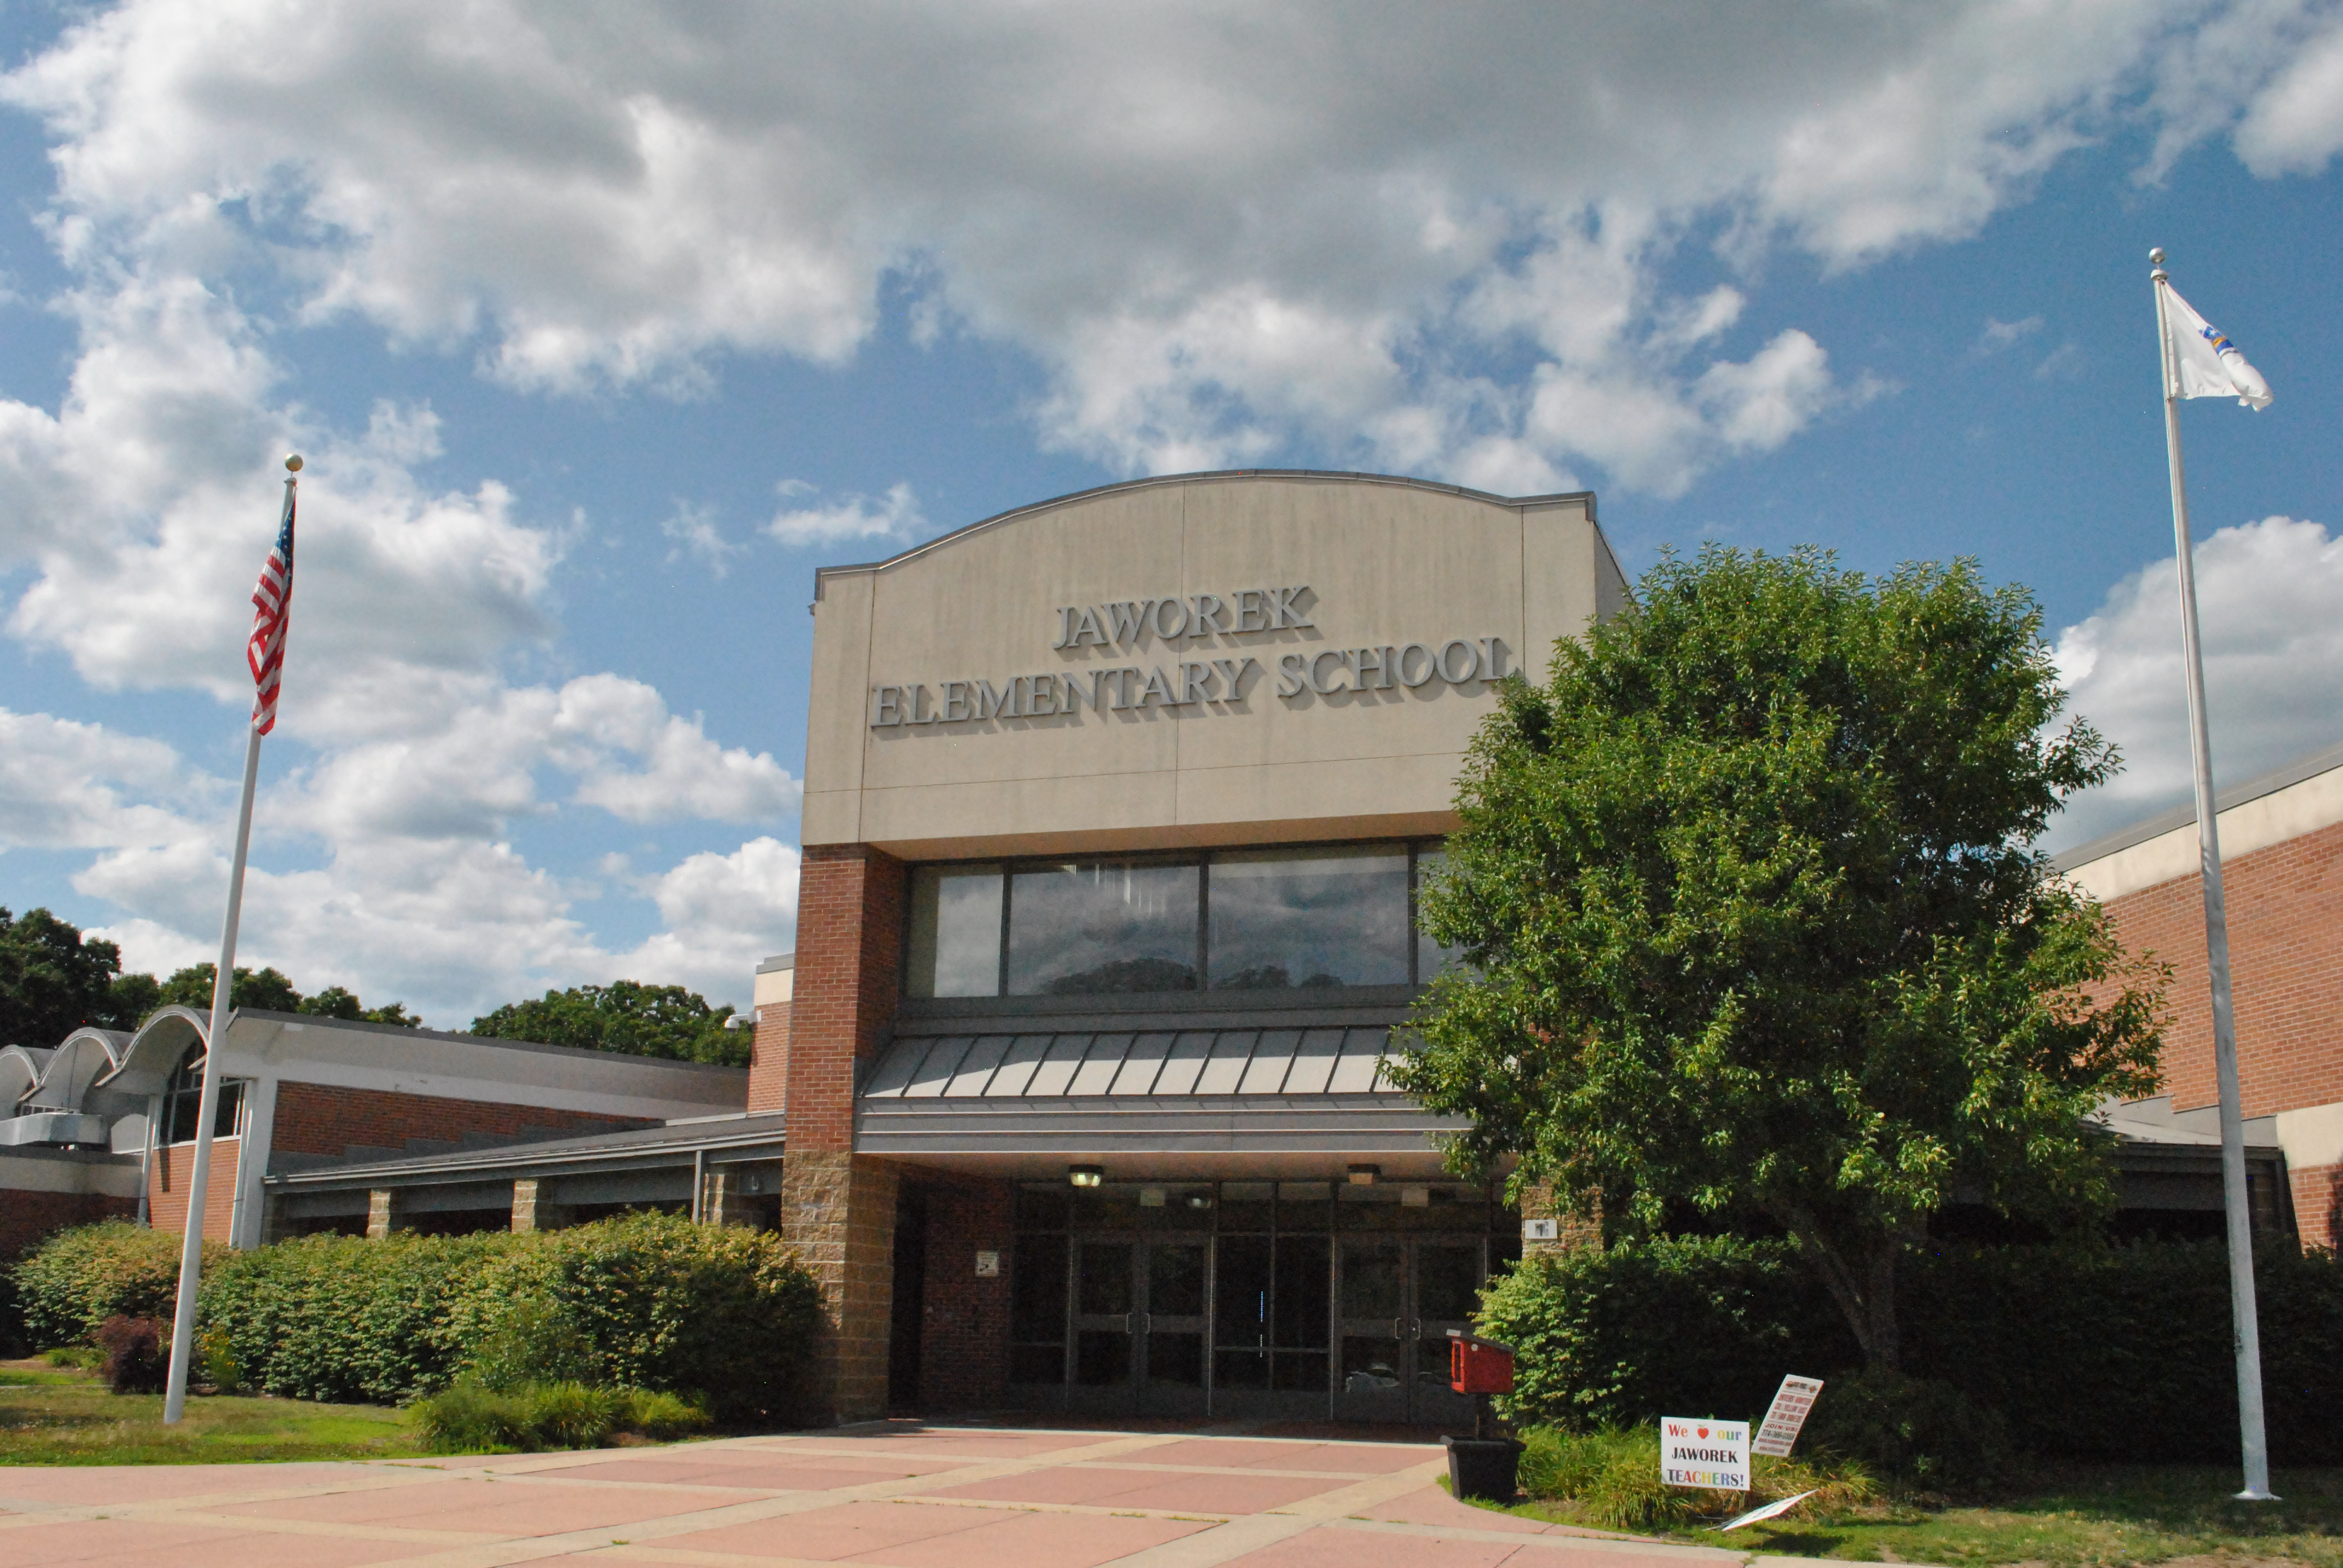 Costs for Marlborough school HVAC upgrades may exceed projections